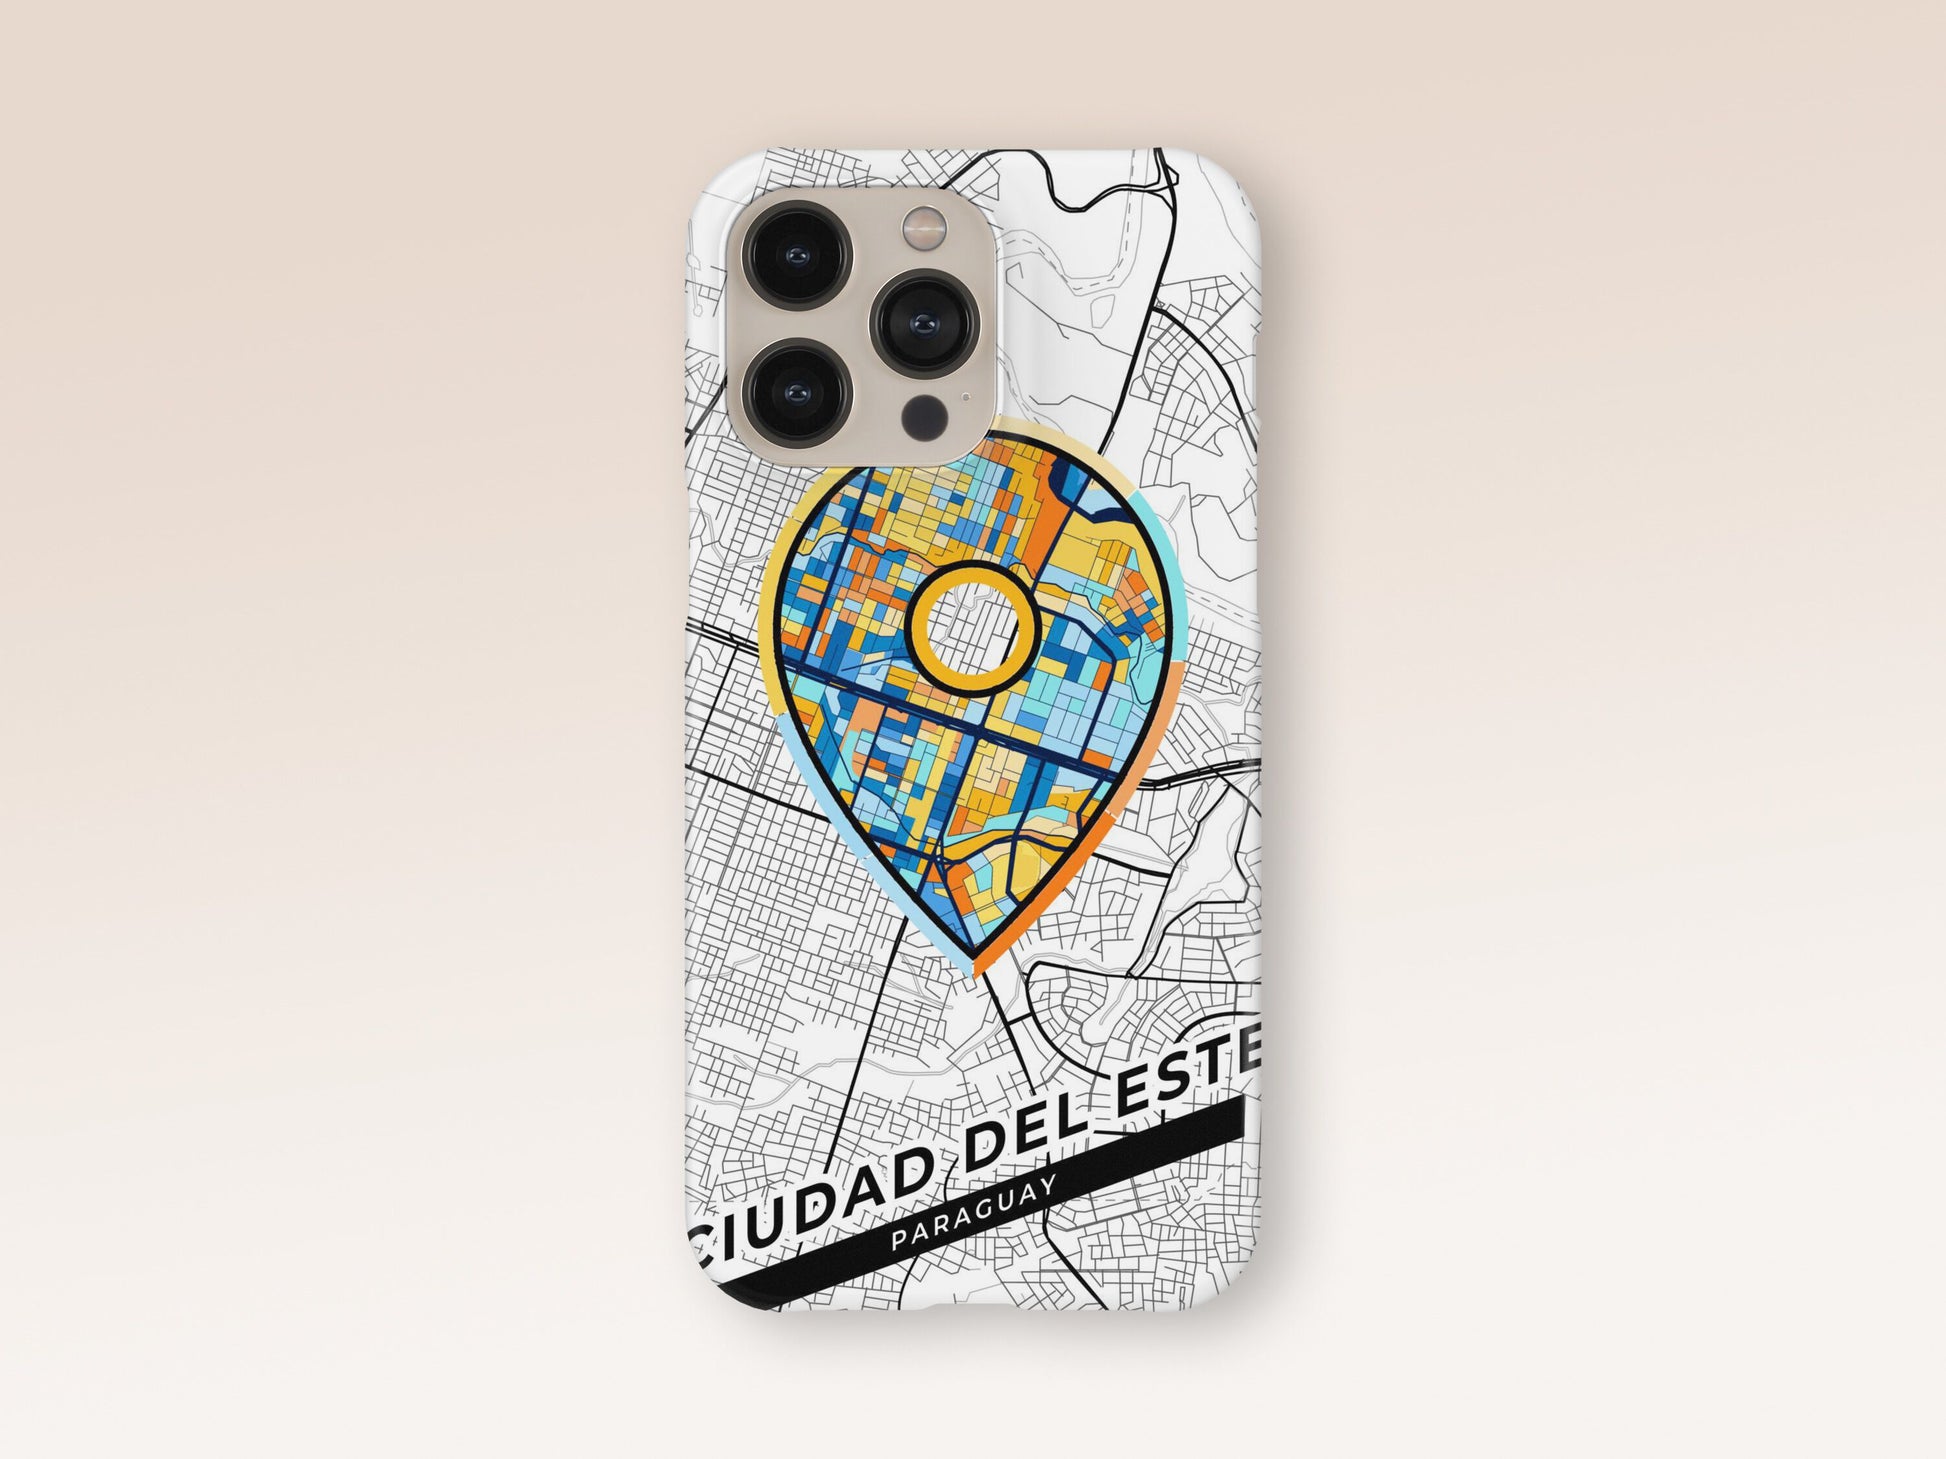 Ciudad Del Este Paraguay slim phone case with colorful icon. Birthday, wedding or housewarming gift. Couple match cases. 1